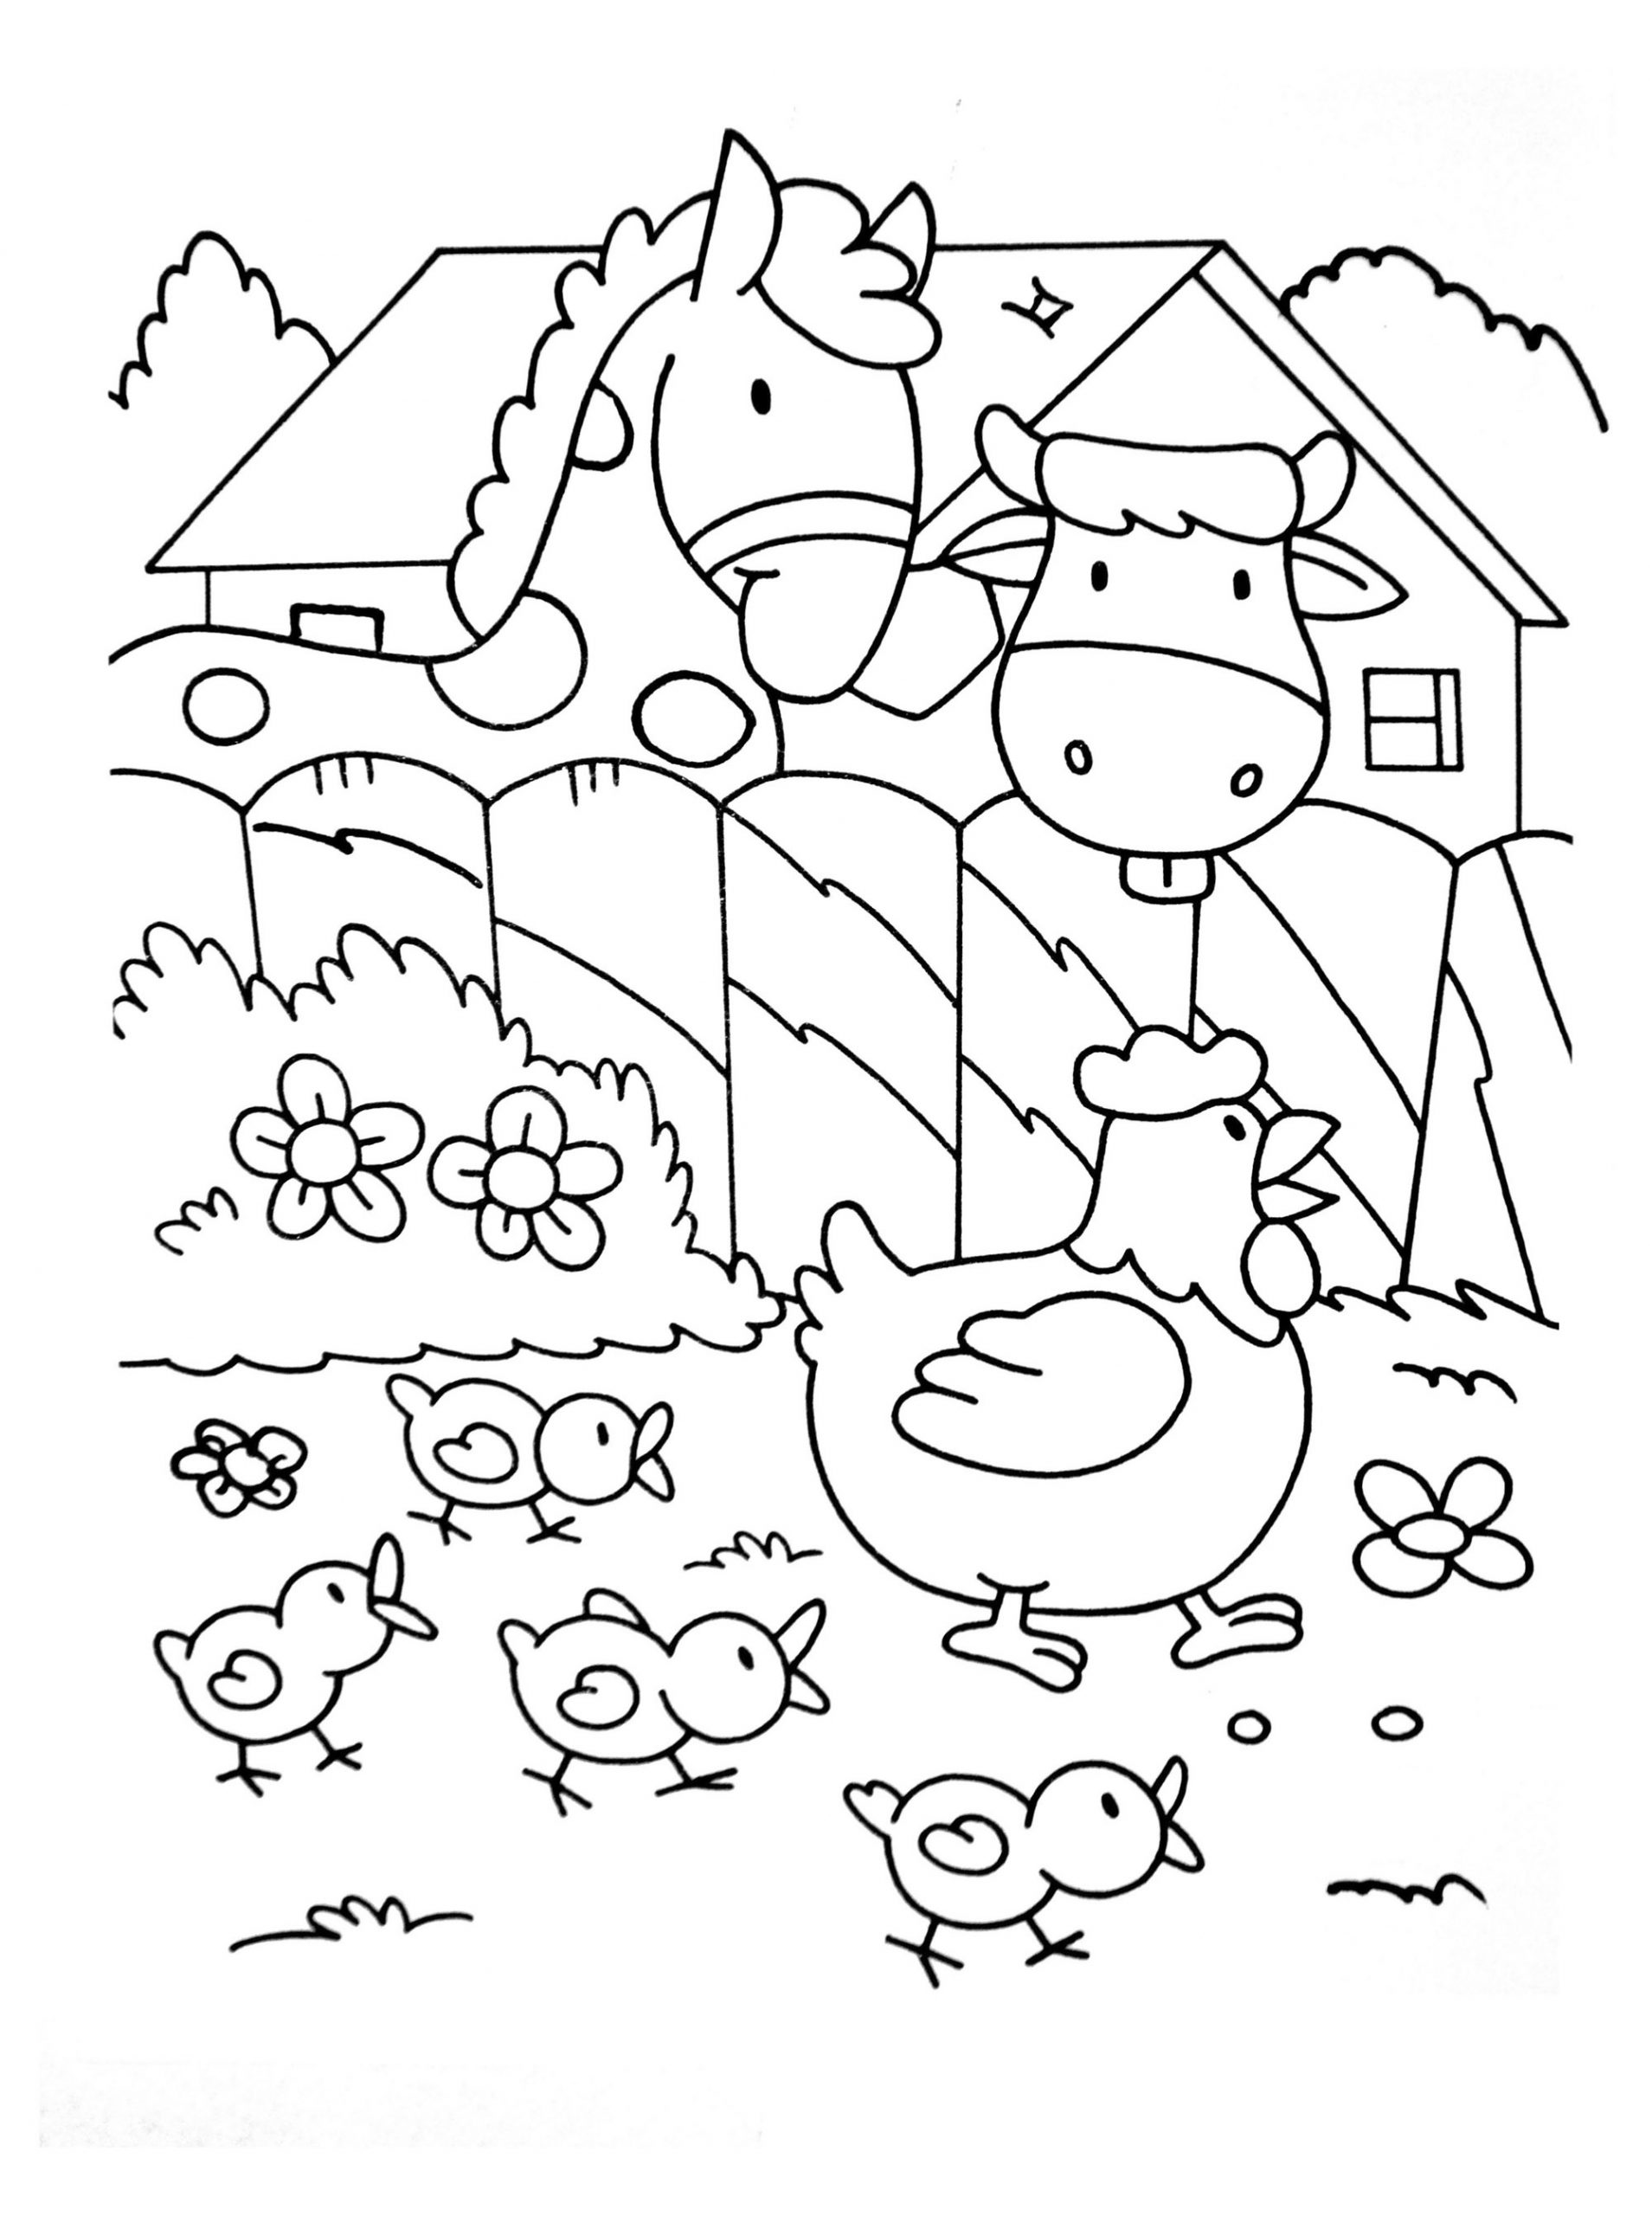 image=kids animals coloring in the farm 1